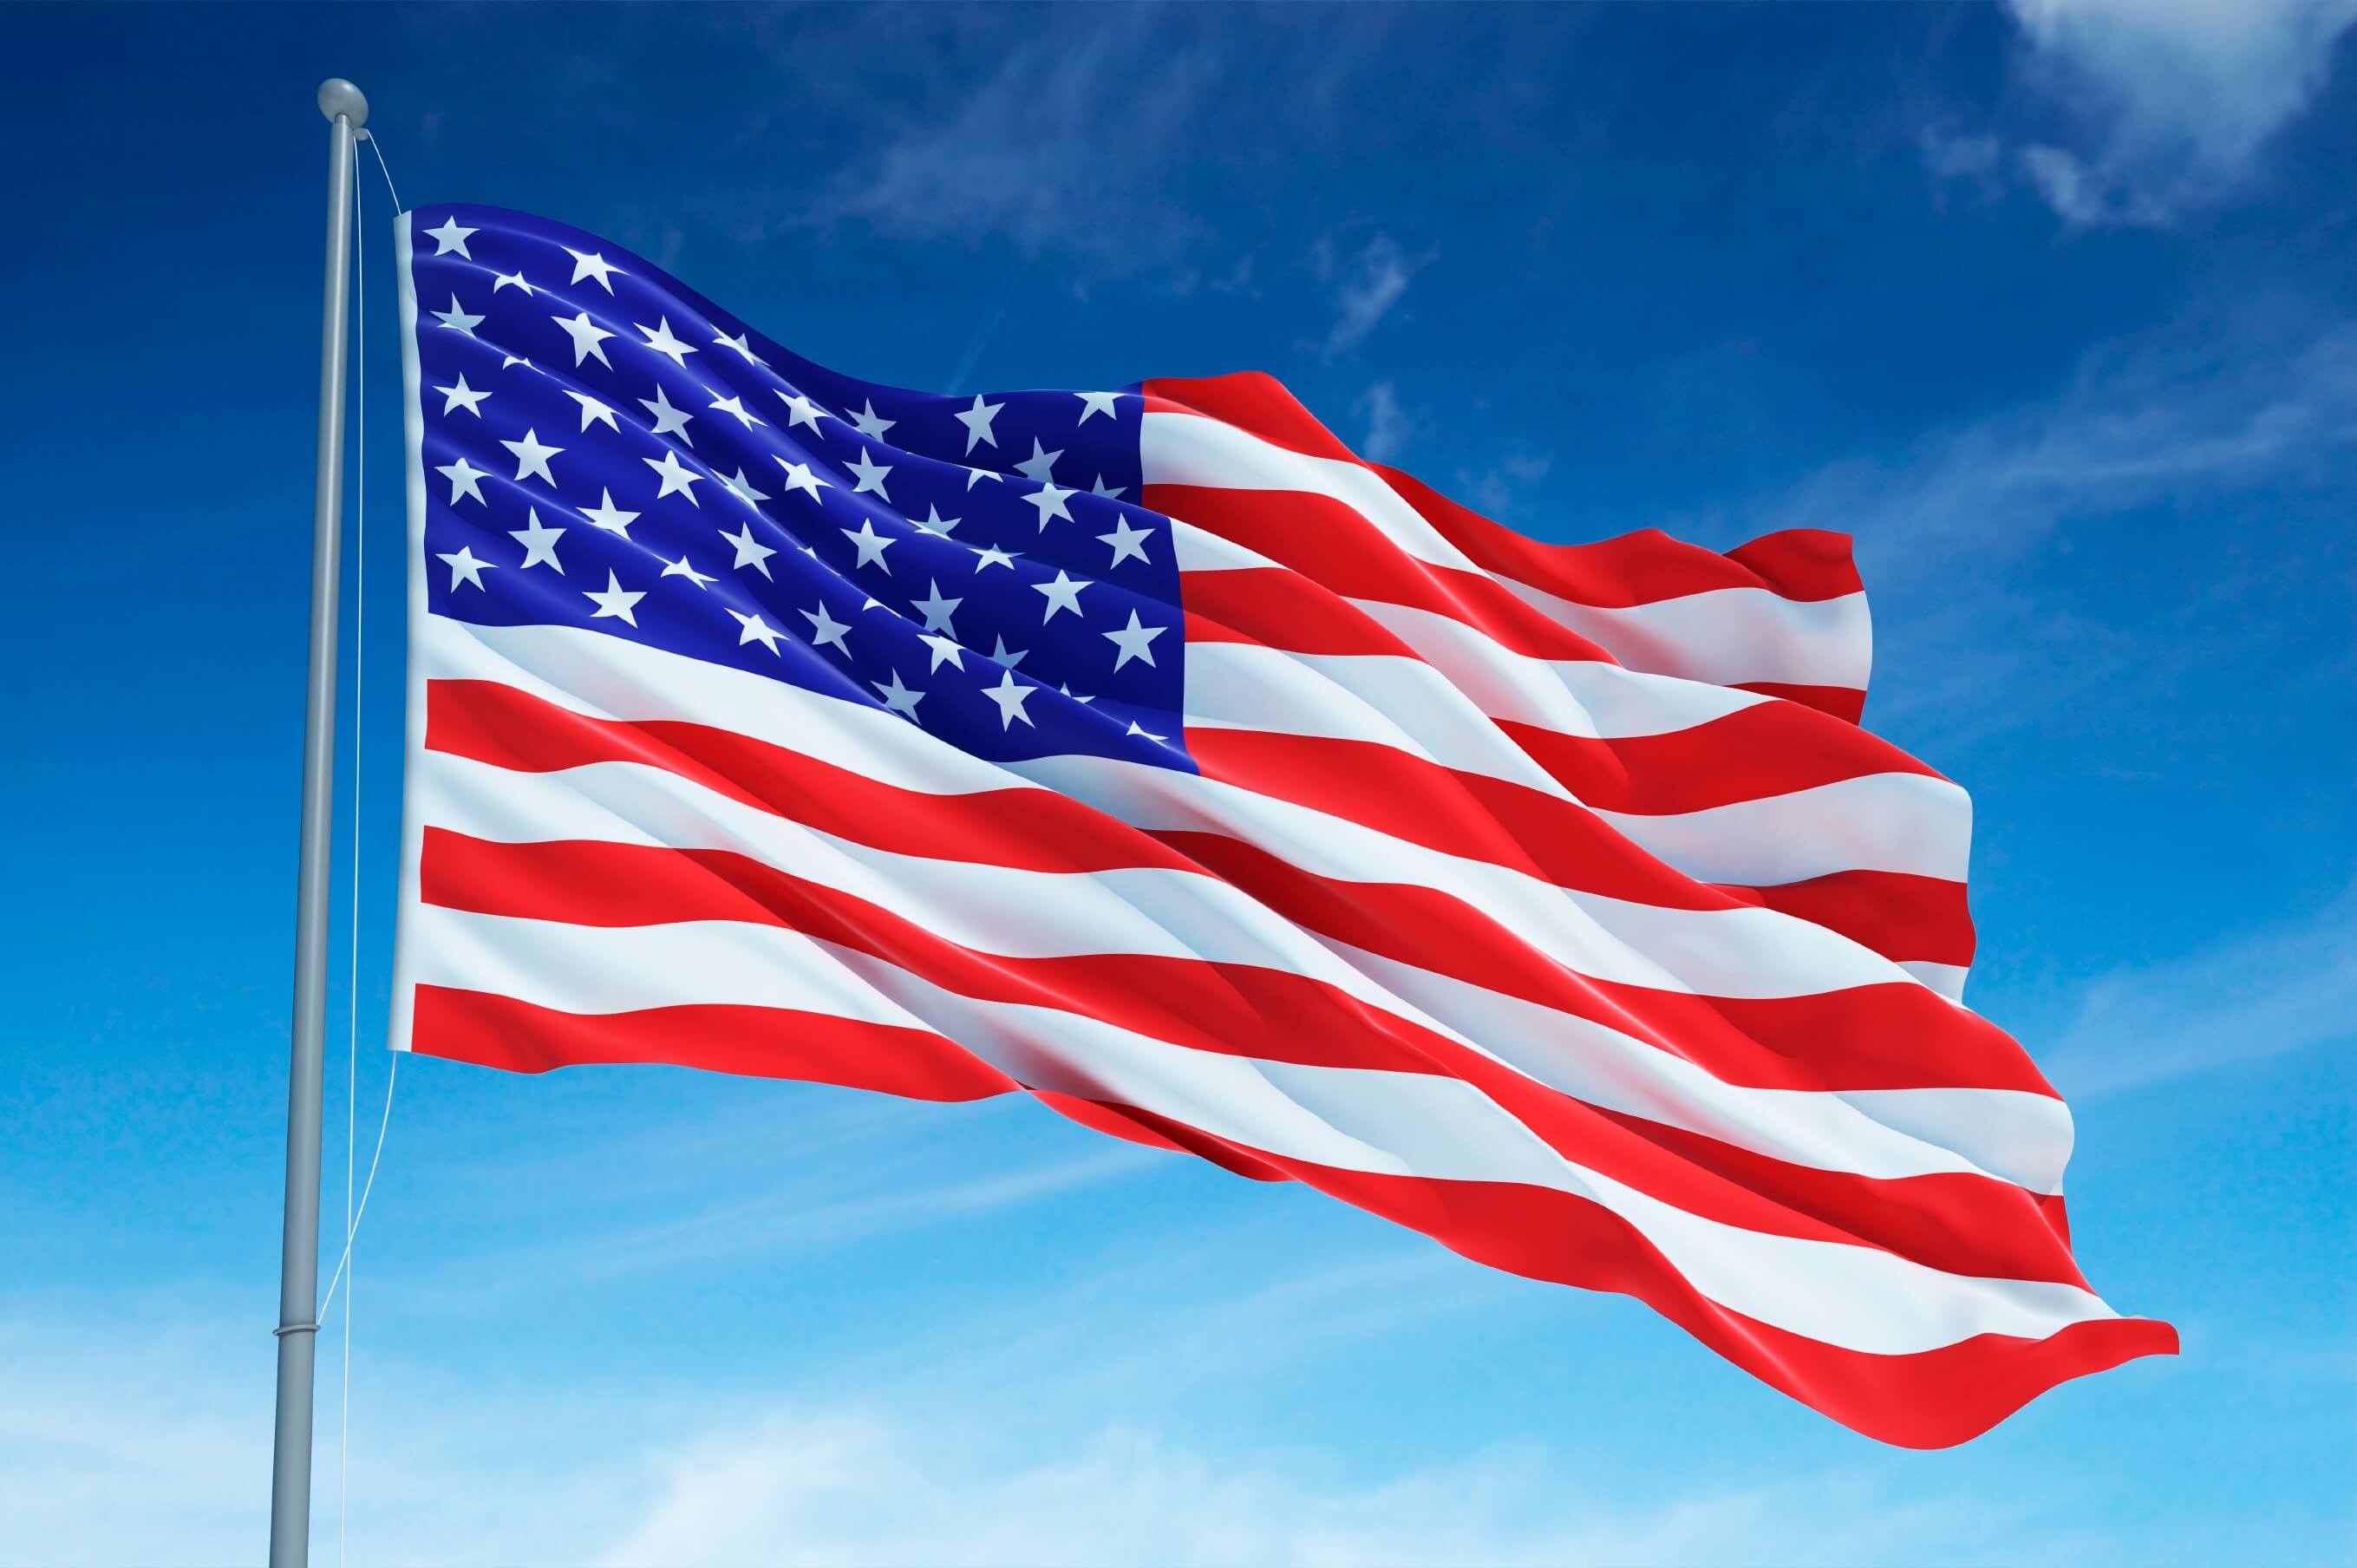 How to Properly Care, Store, Handle, and Retire the American Flag